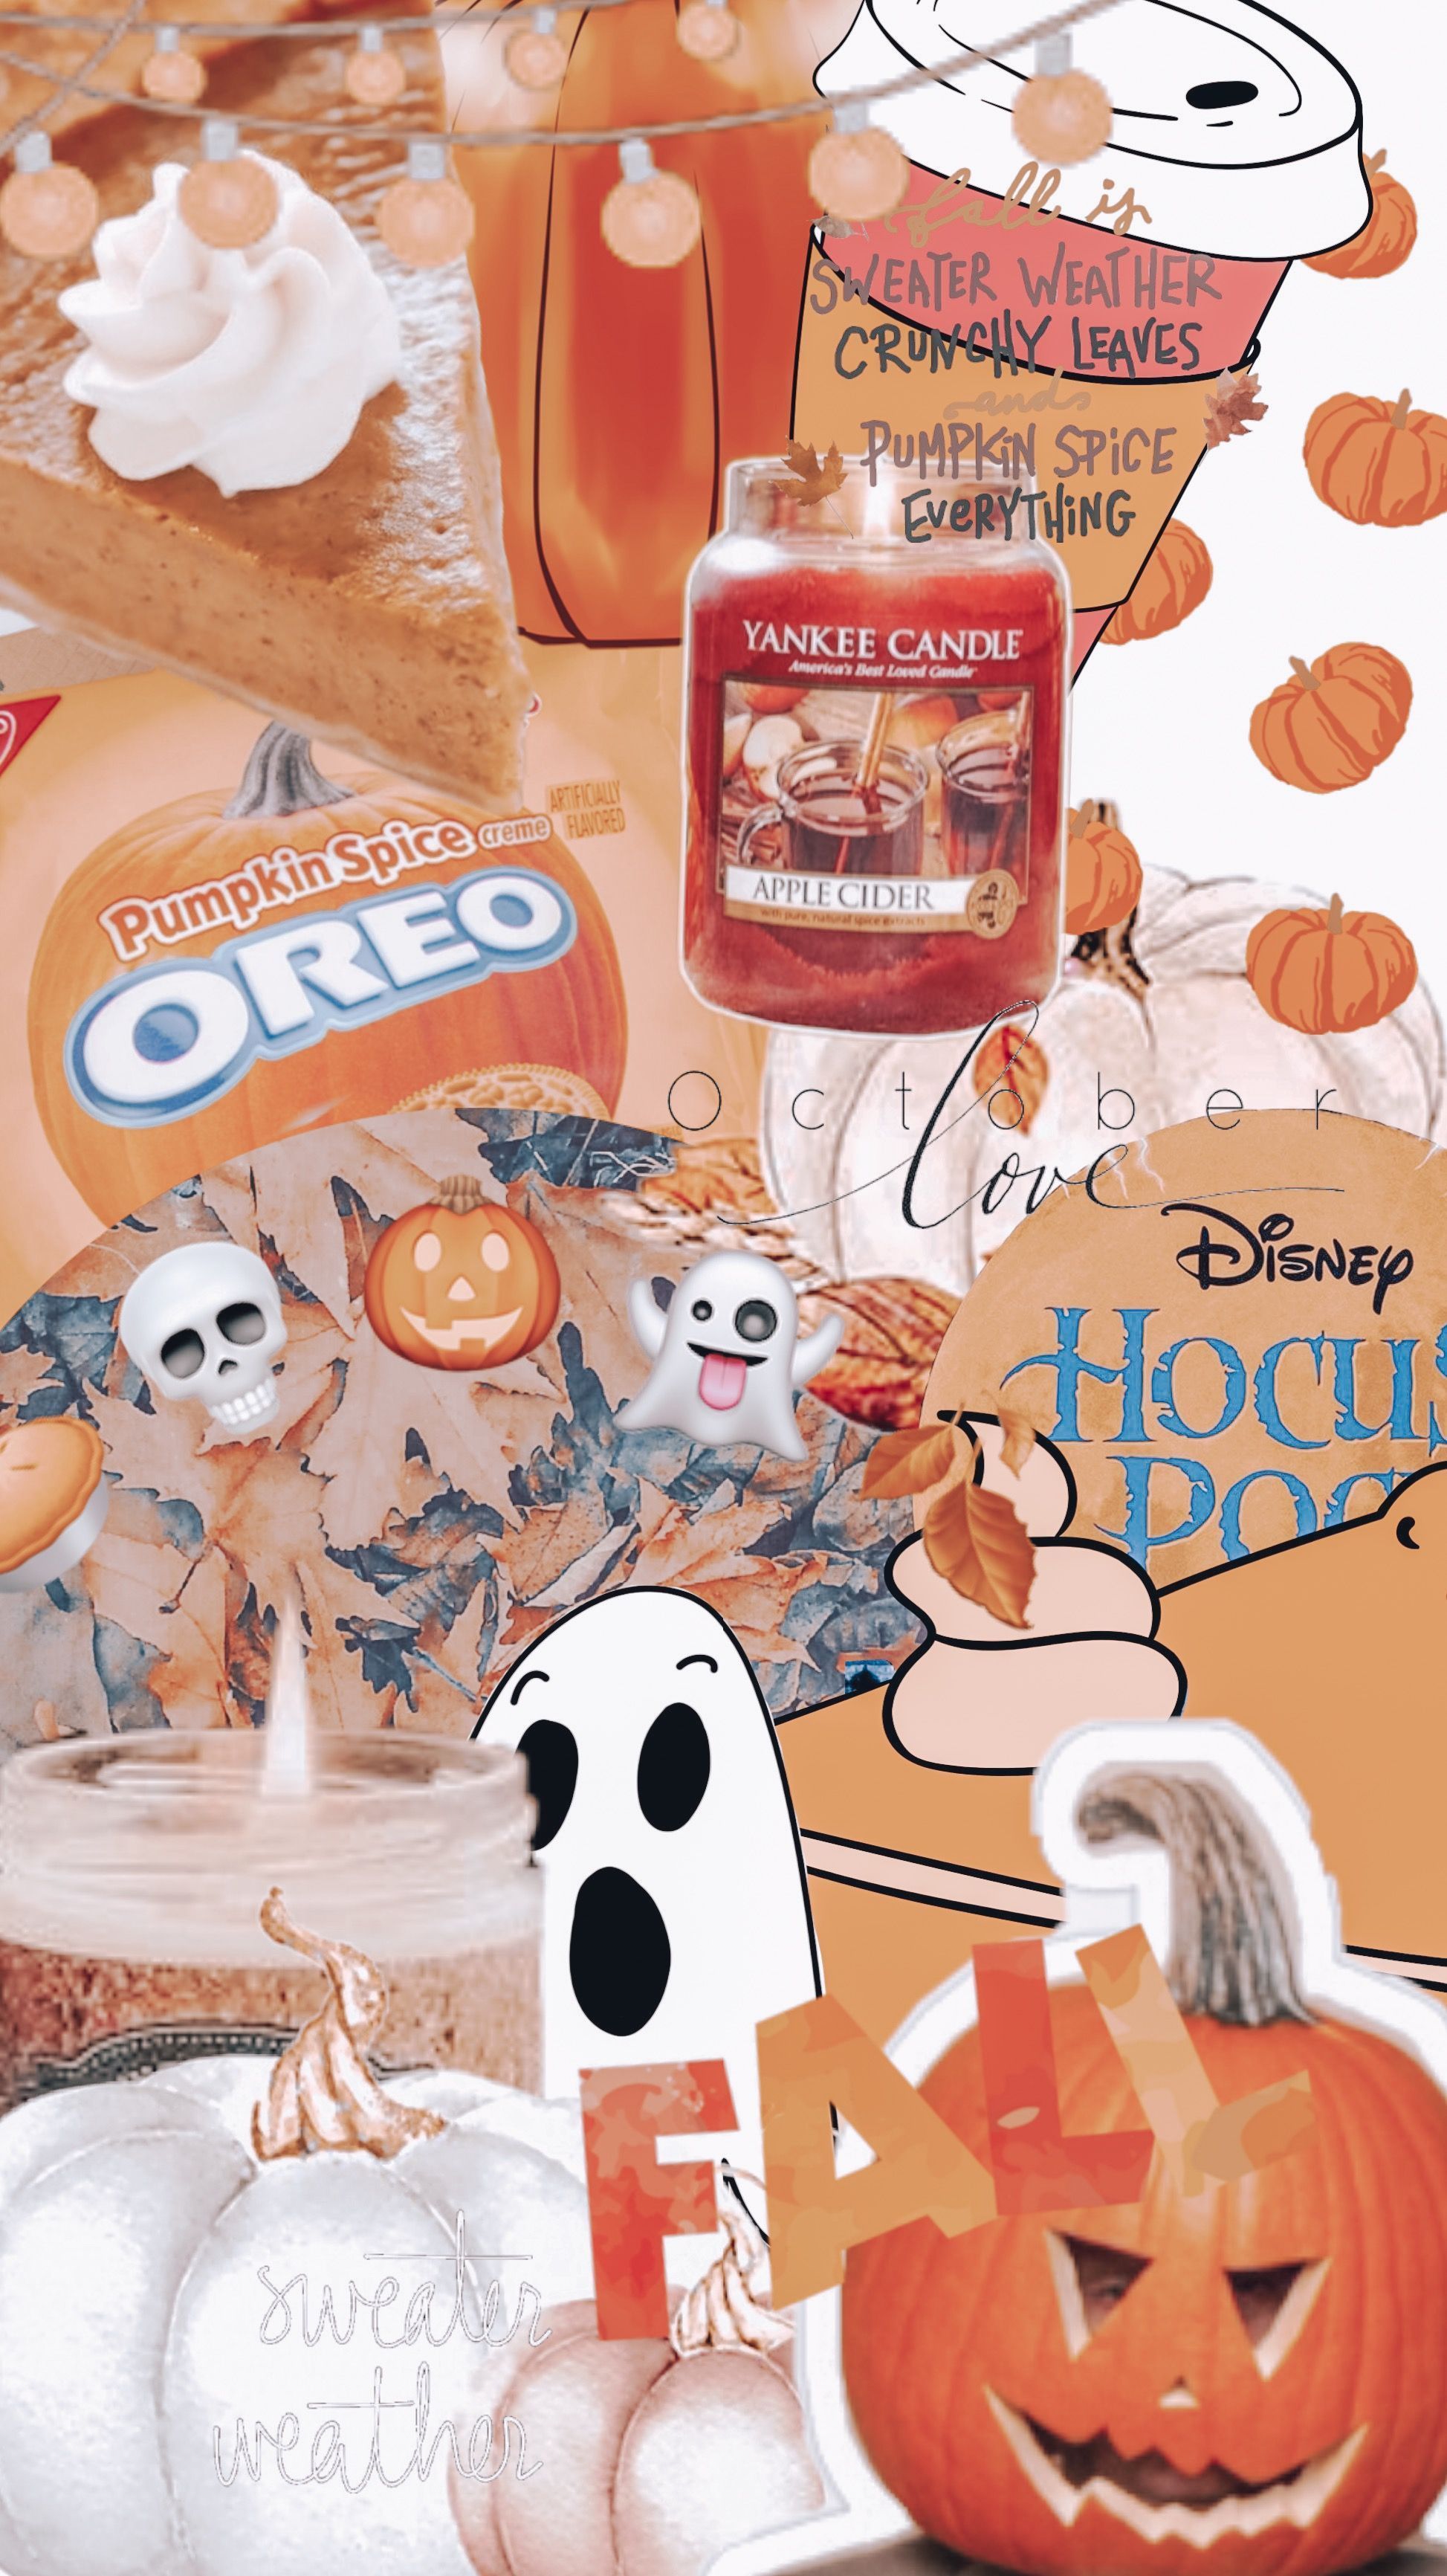 A picture of halloween items and candles - Oreo